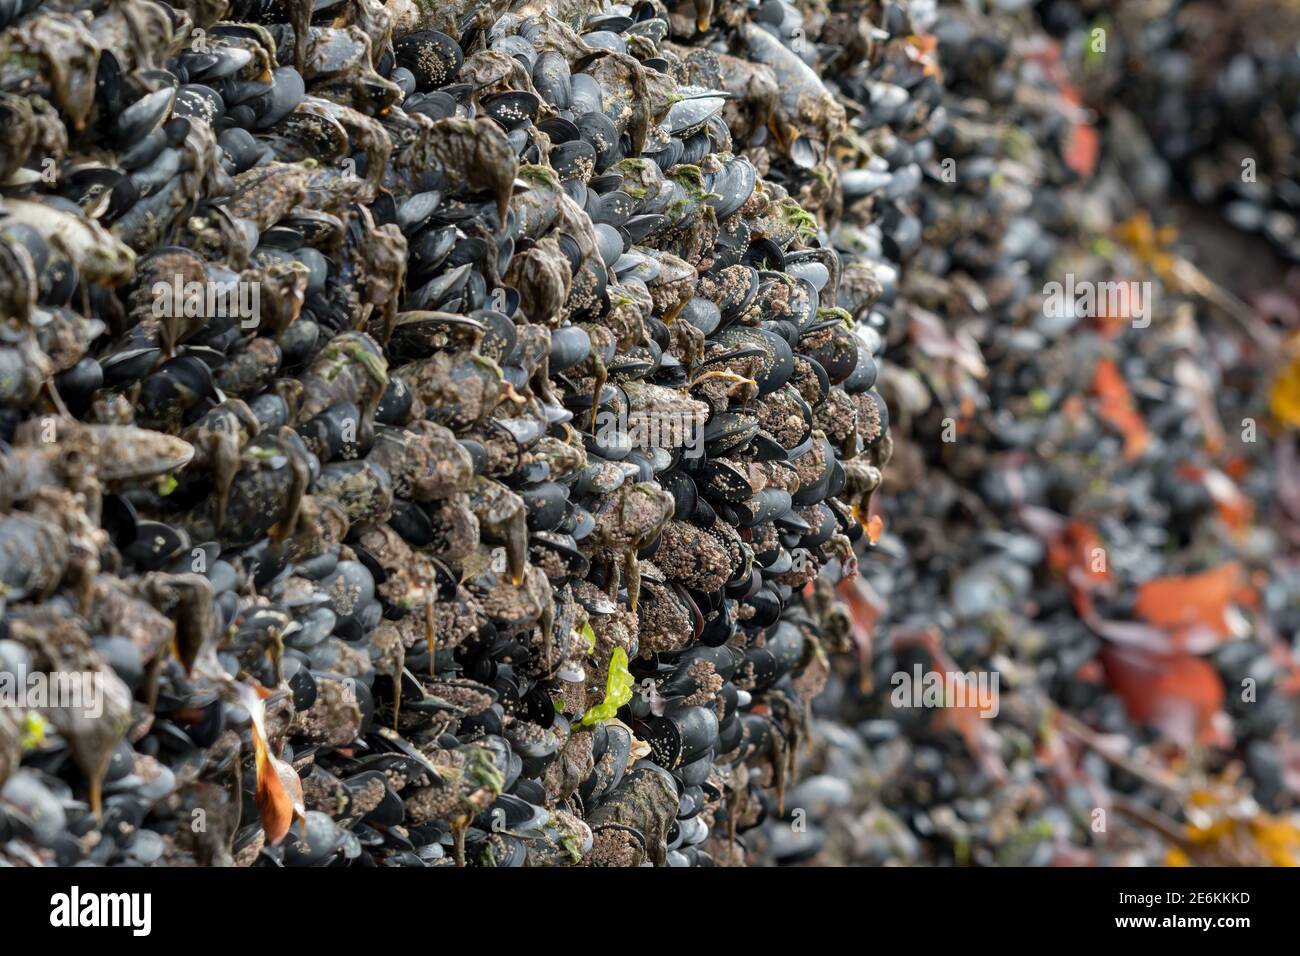 Saltwater mussels (Mytilidae) growing on the rocky ocean shore at low tide in Alaska, USA. Stock Photo